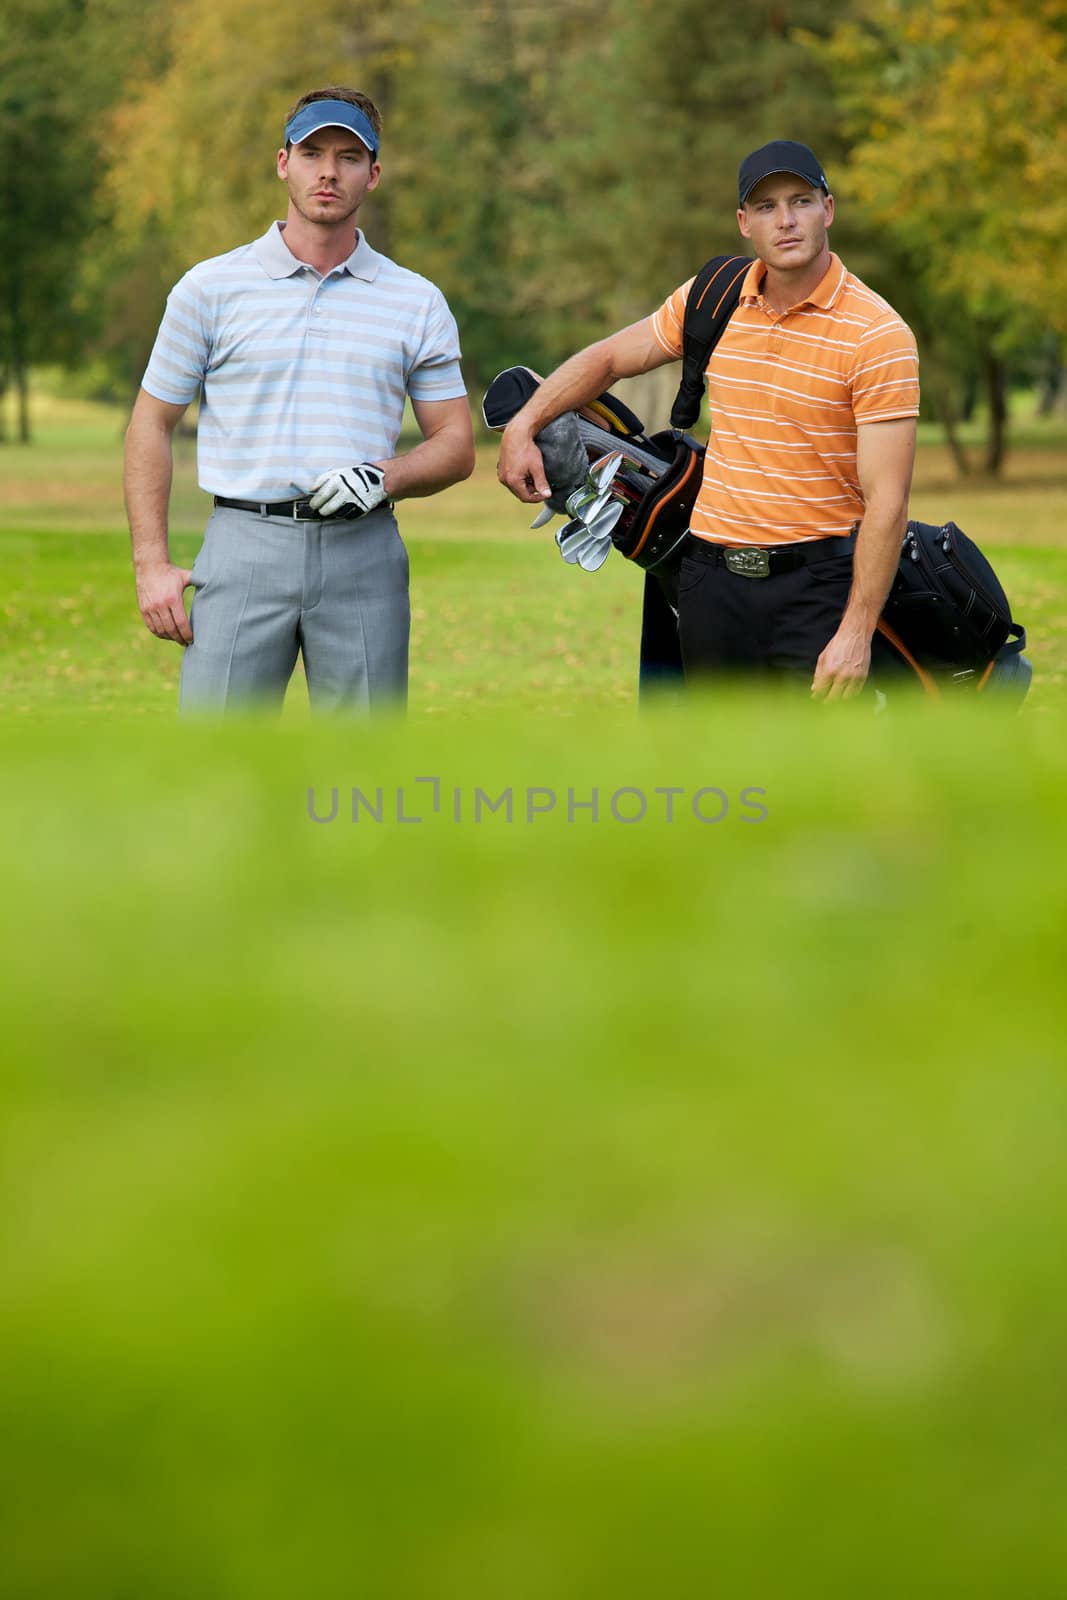 Young men standing on golf course carrying bags
